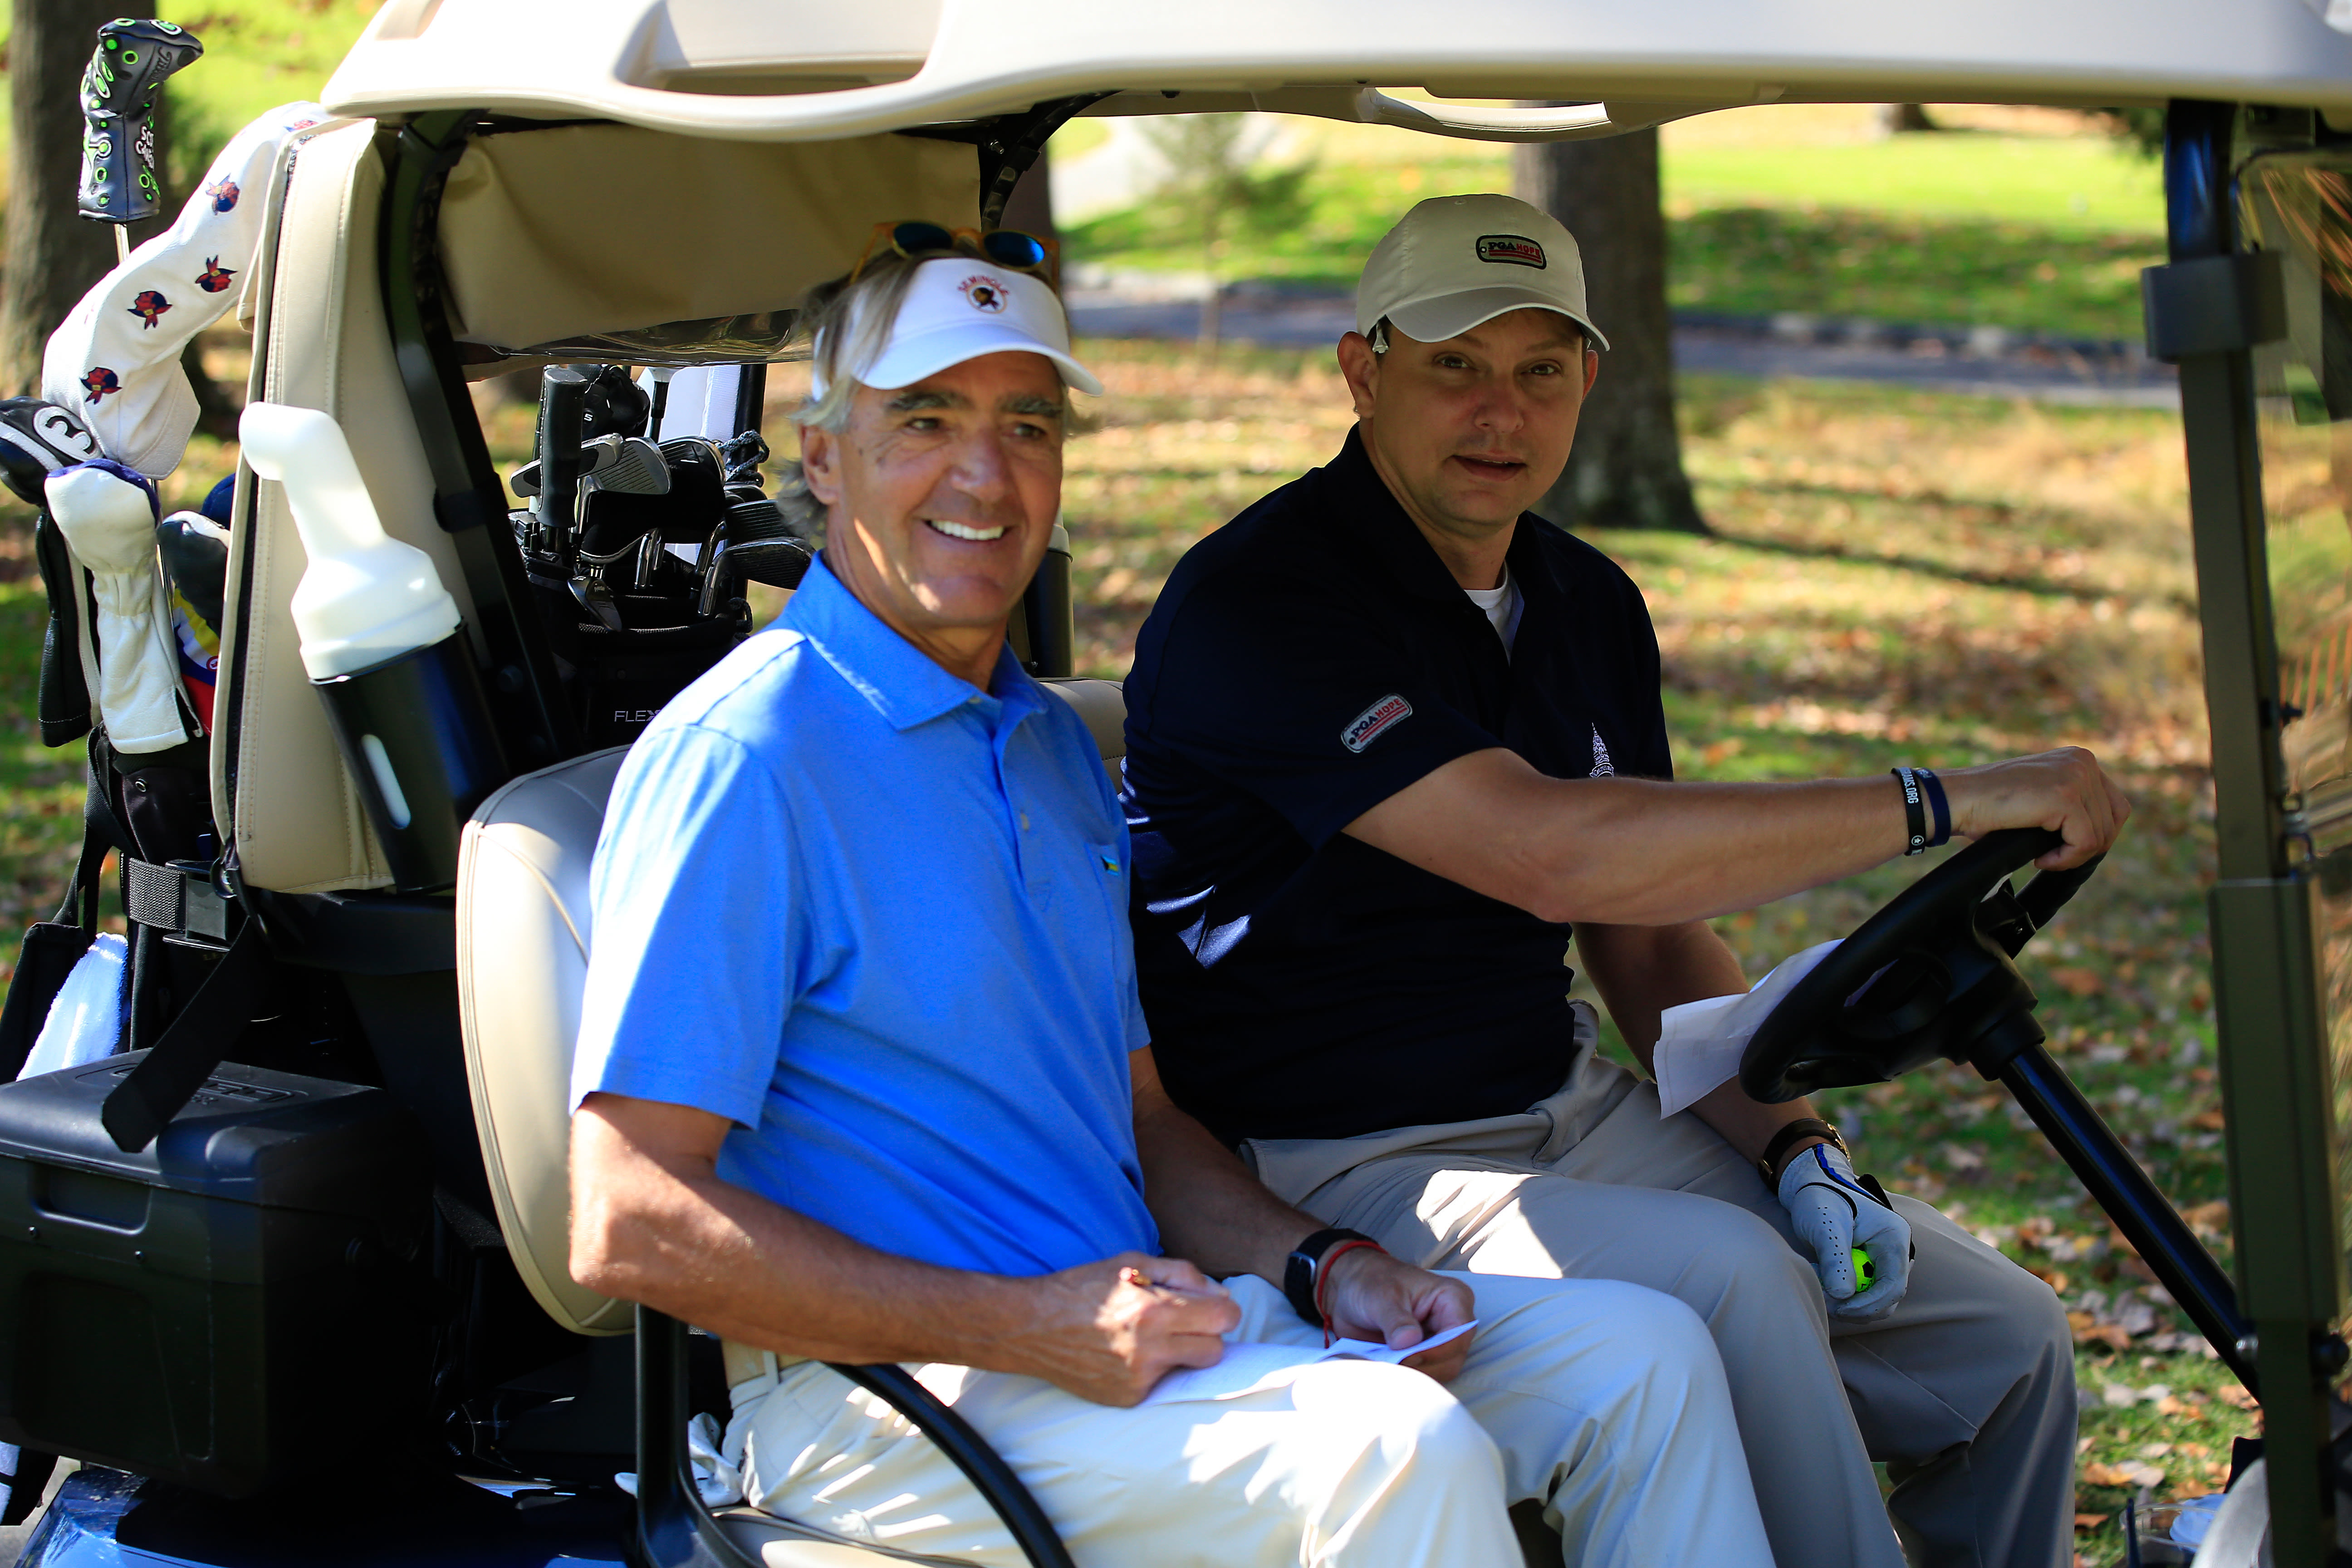 PGA of America CEO, Seth Waugh and Matt Underwood during the PGA National Day of HOPE Golf Outing for PGA HOPE National Golf & Wellness Week at Congressional Country Club, Bethesda, Maryland on October 28, 2019.